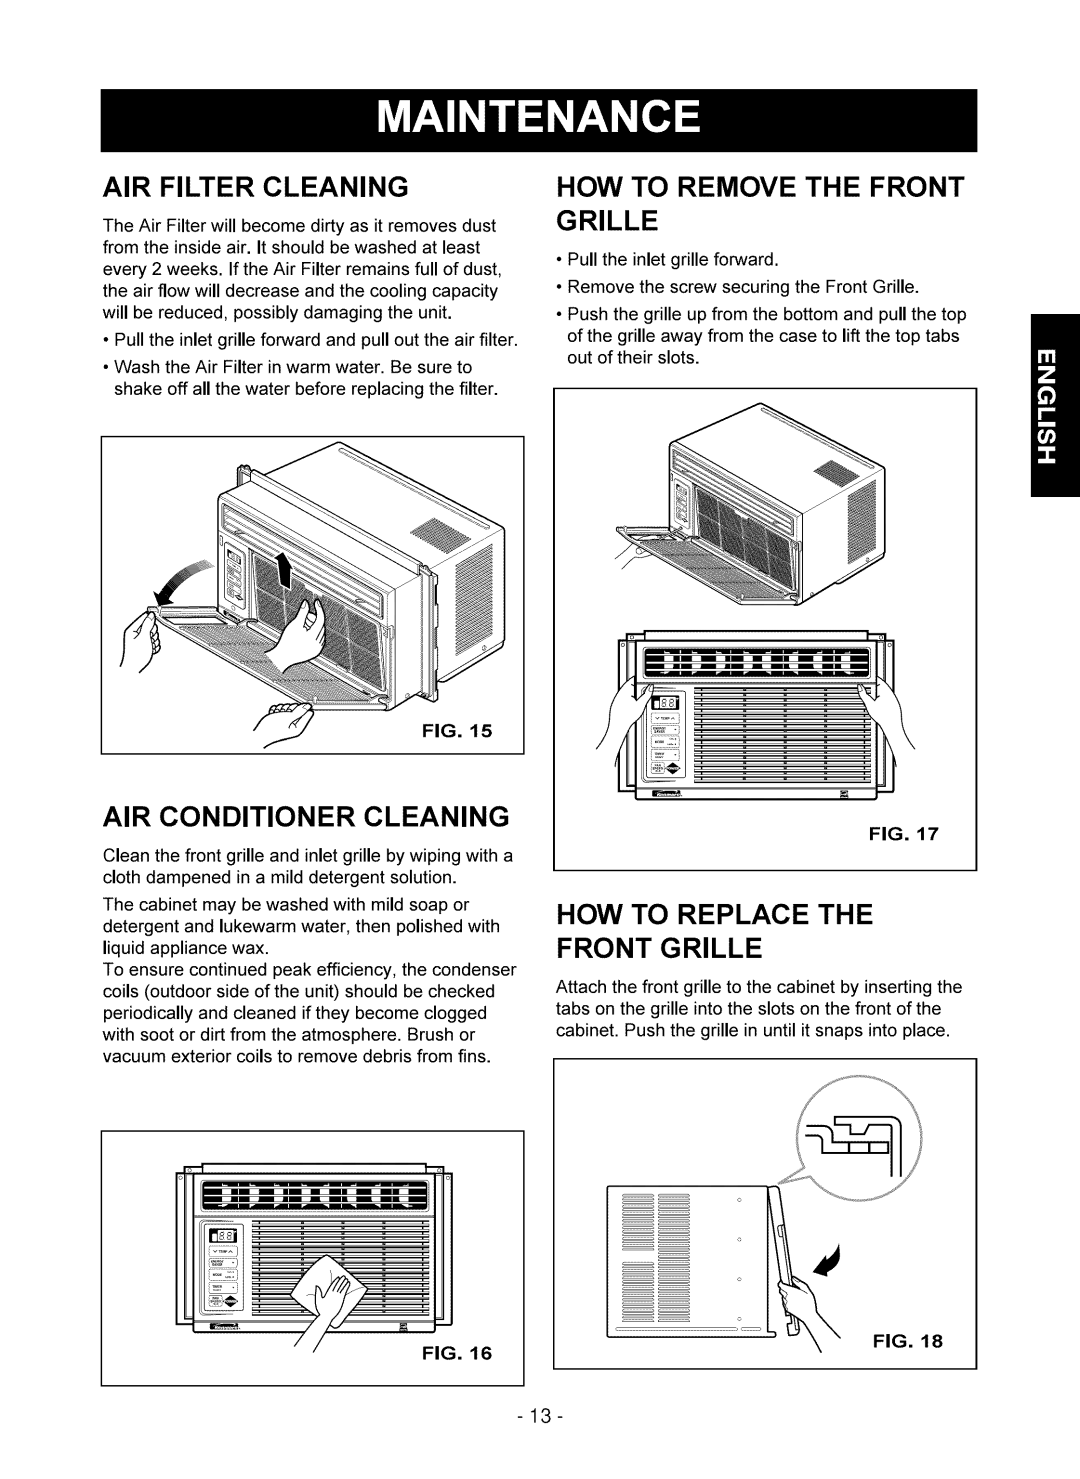 Kenmore 580.75051 owner manual Air Filter Cleaning, How To Remove The Front Grille, Air Conditioner Cleaning 